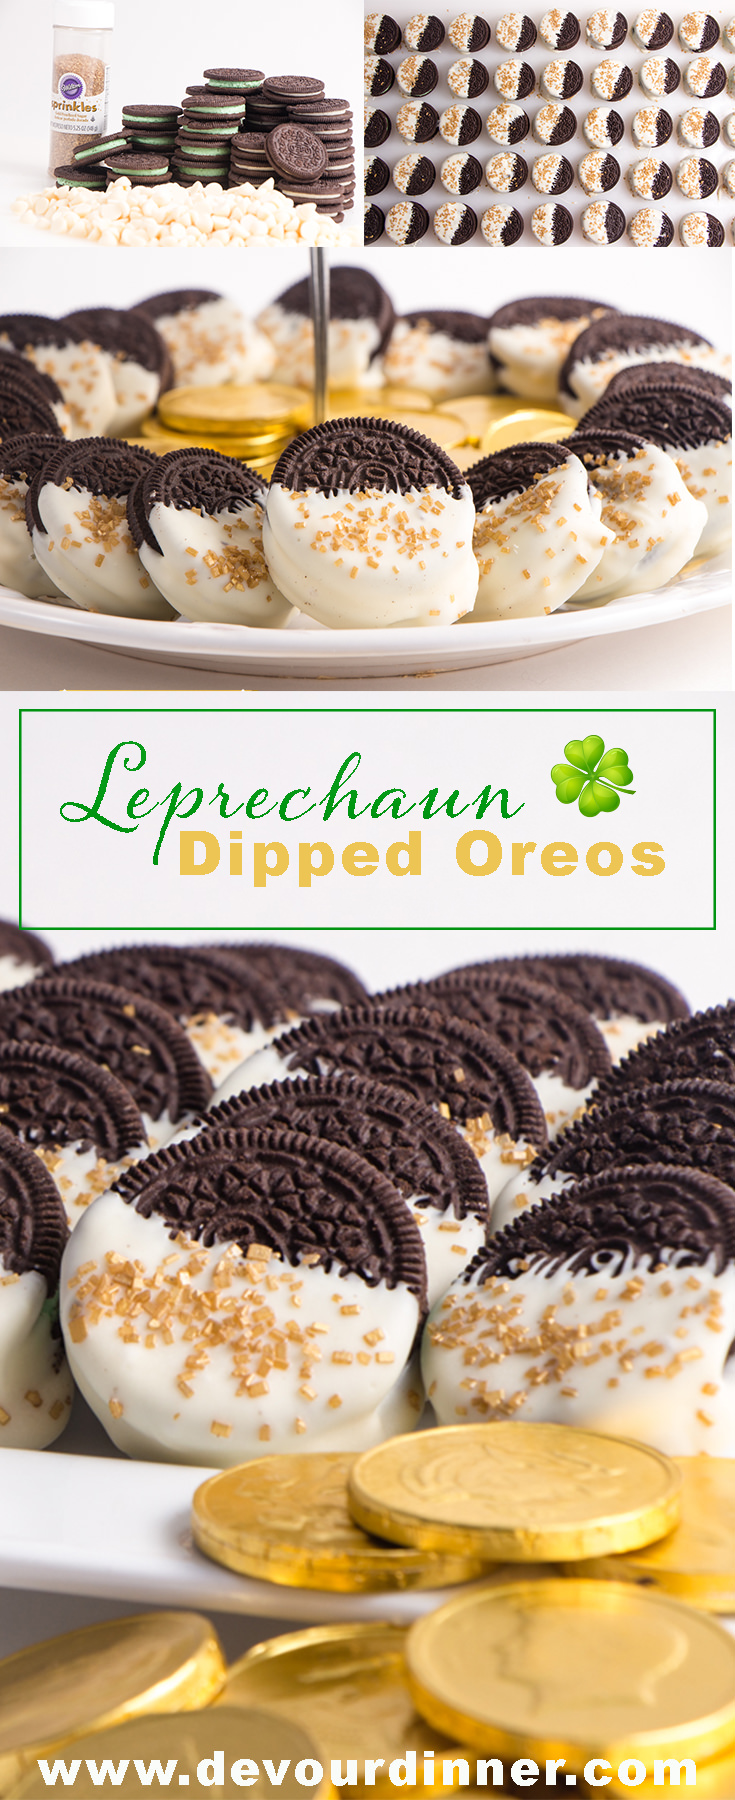 This quick and easy dessert will treat your tastebuds. So fun to make with White Chocolate and Oreo's. Enjoy this fun easy treat all year long! #Oreo #Whitechocolate #Recipe #recipes #food #Foodie #foodblogger #Buzzfeast #Dessert #dessertrecipes #devourdinner #treat #cookie #yummy #dippedoreo #dippedcookie